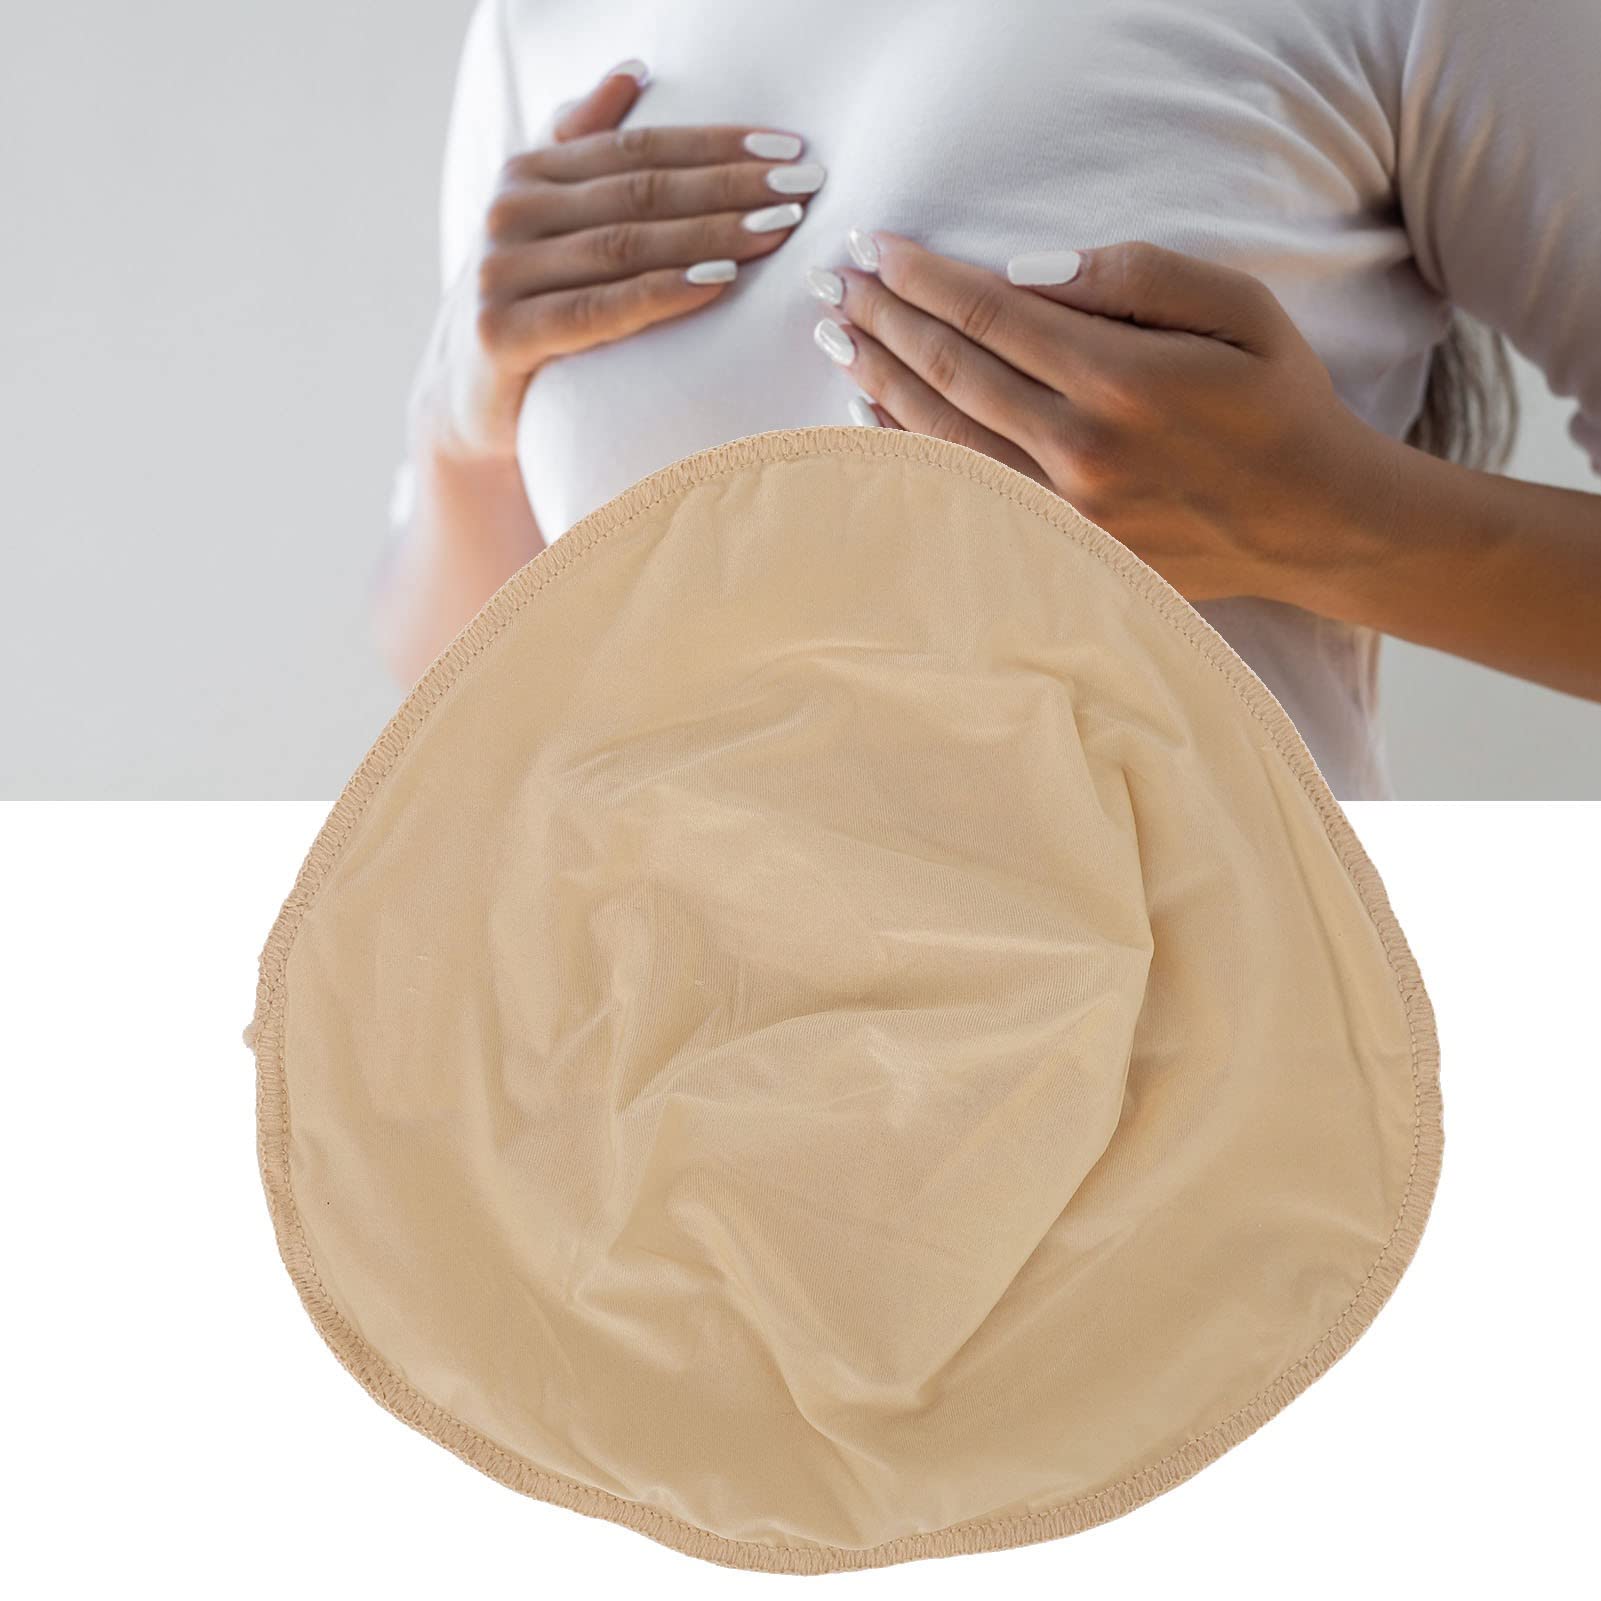 Breast Protective Pocket, Cotton Silicone Breast Forms Cover for Post Mastectomy for Woman (ATR)